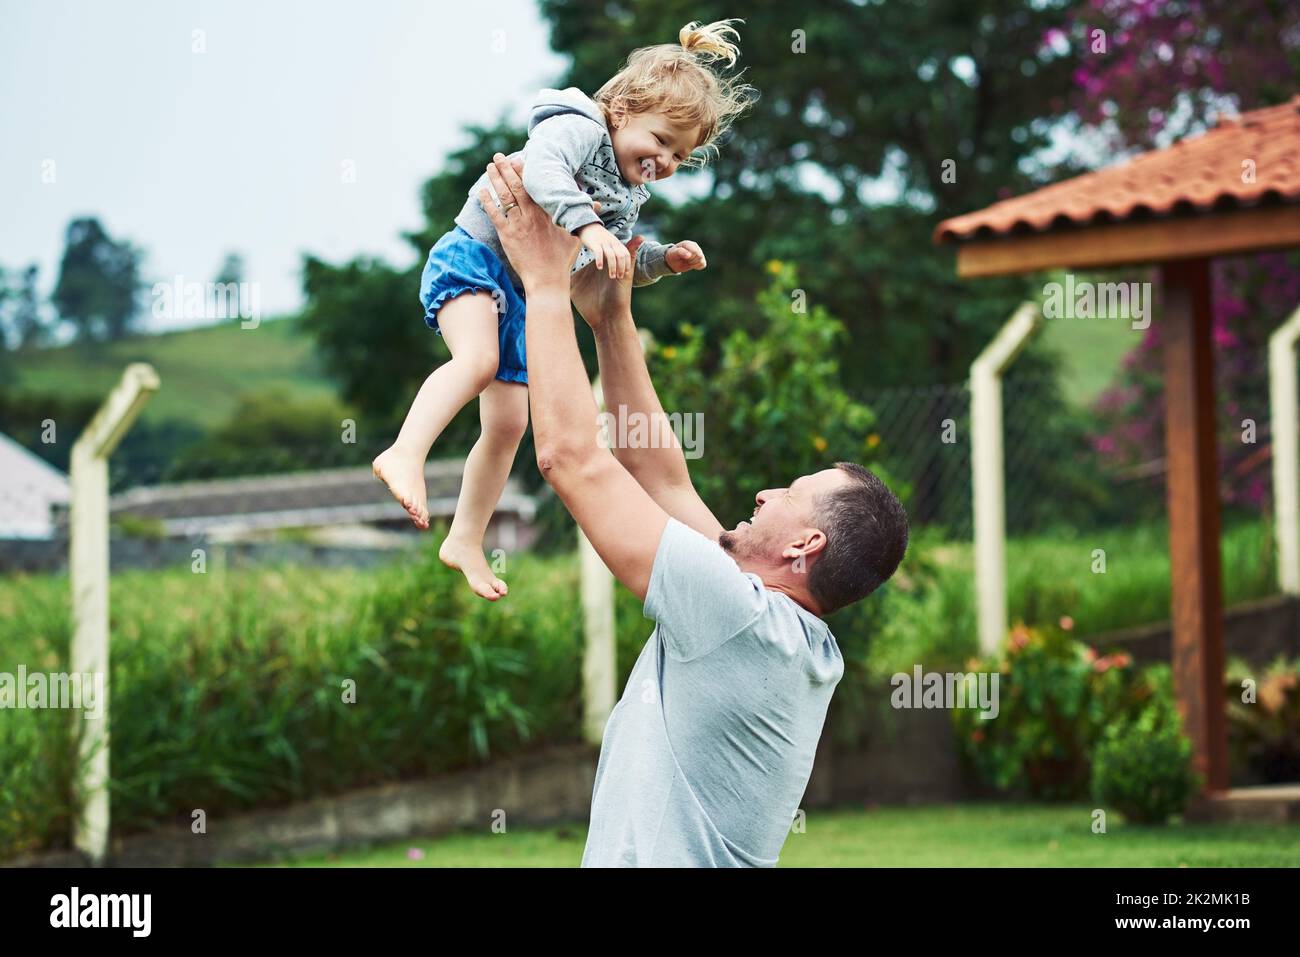 We have lift off. Shot of a cheerful little girl being lifted up in the air by her father outside during a cloudy day. Stock Photo